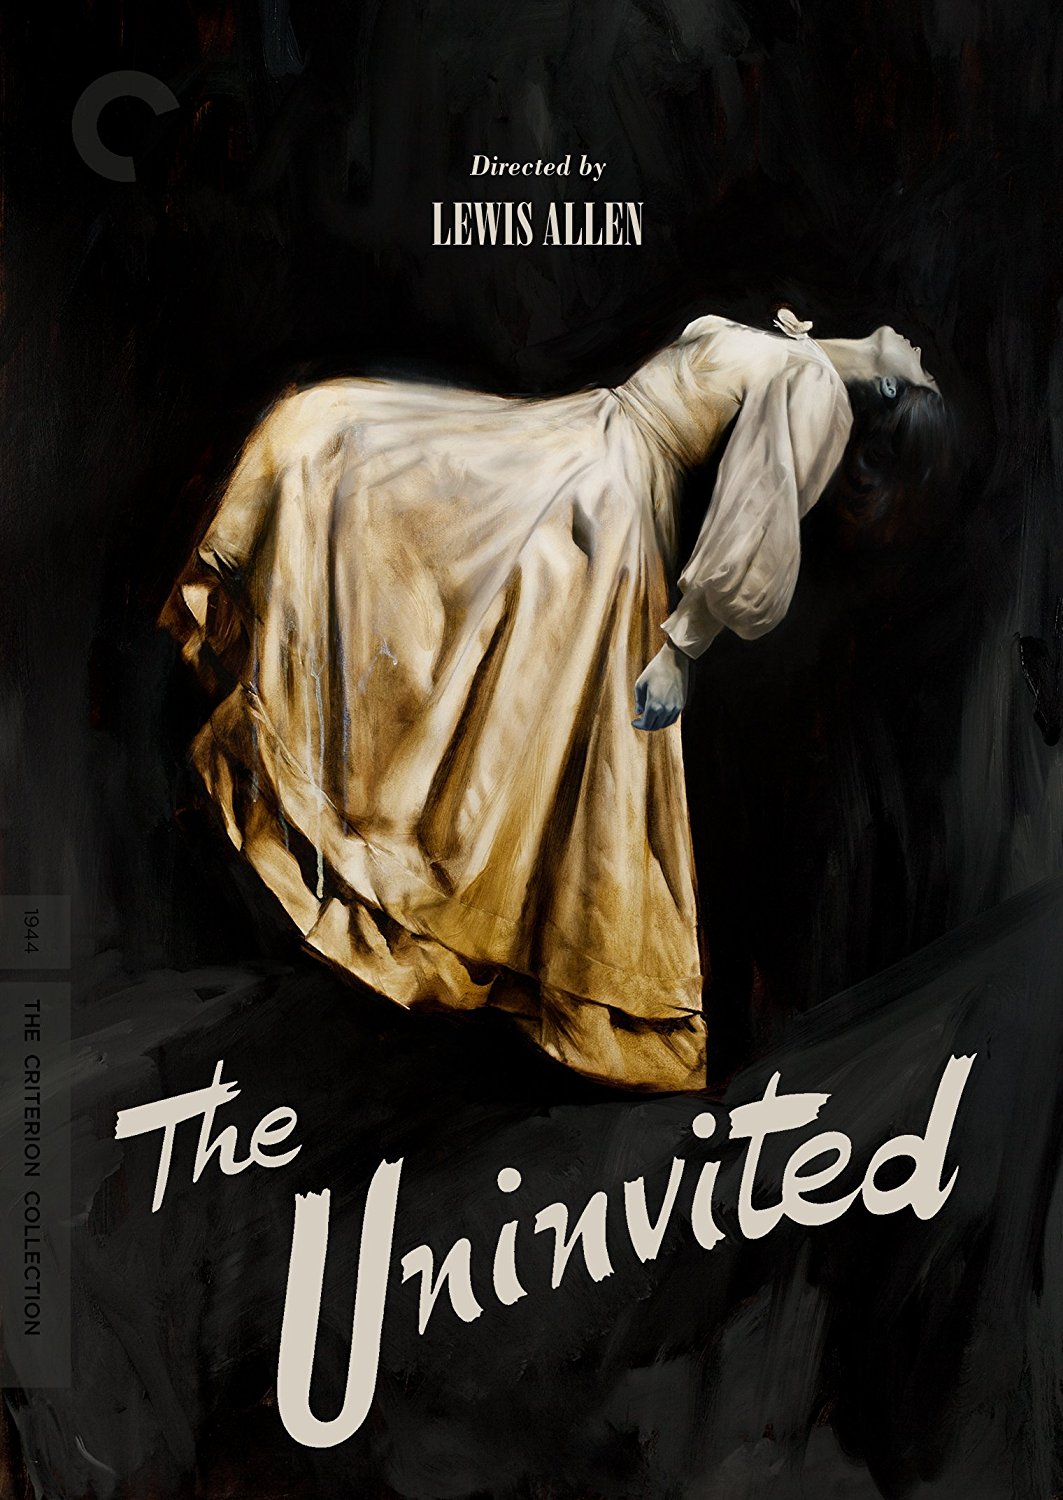 The Uninvited (1944), starring Ray Milland, Ruth Hussey, Gail Russell